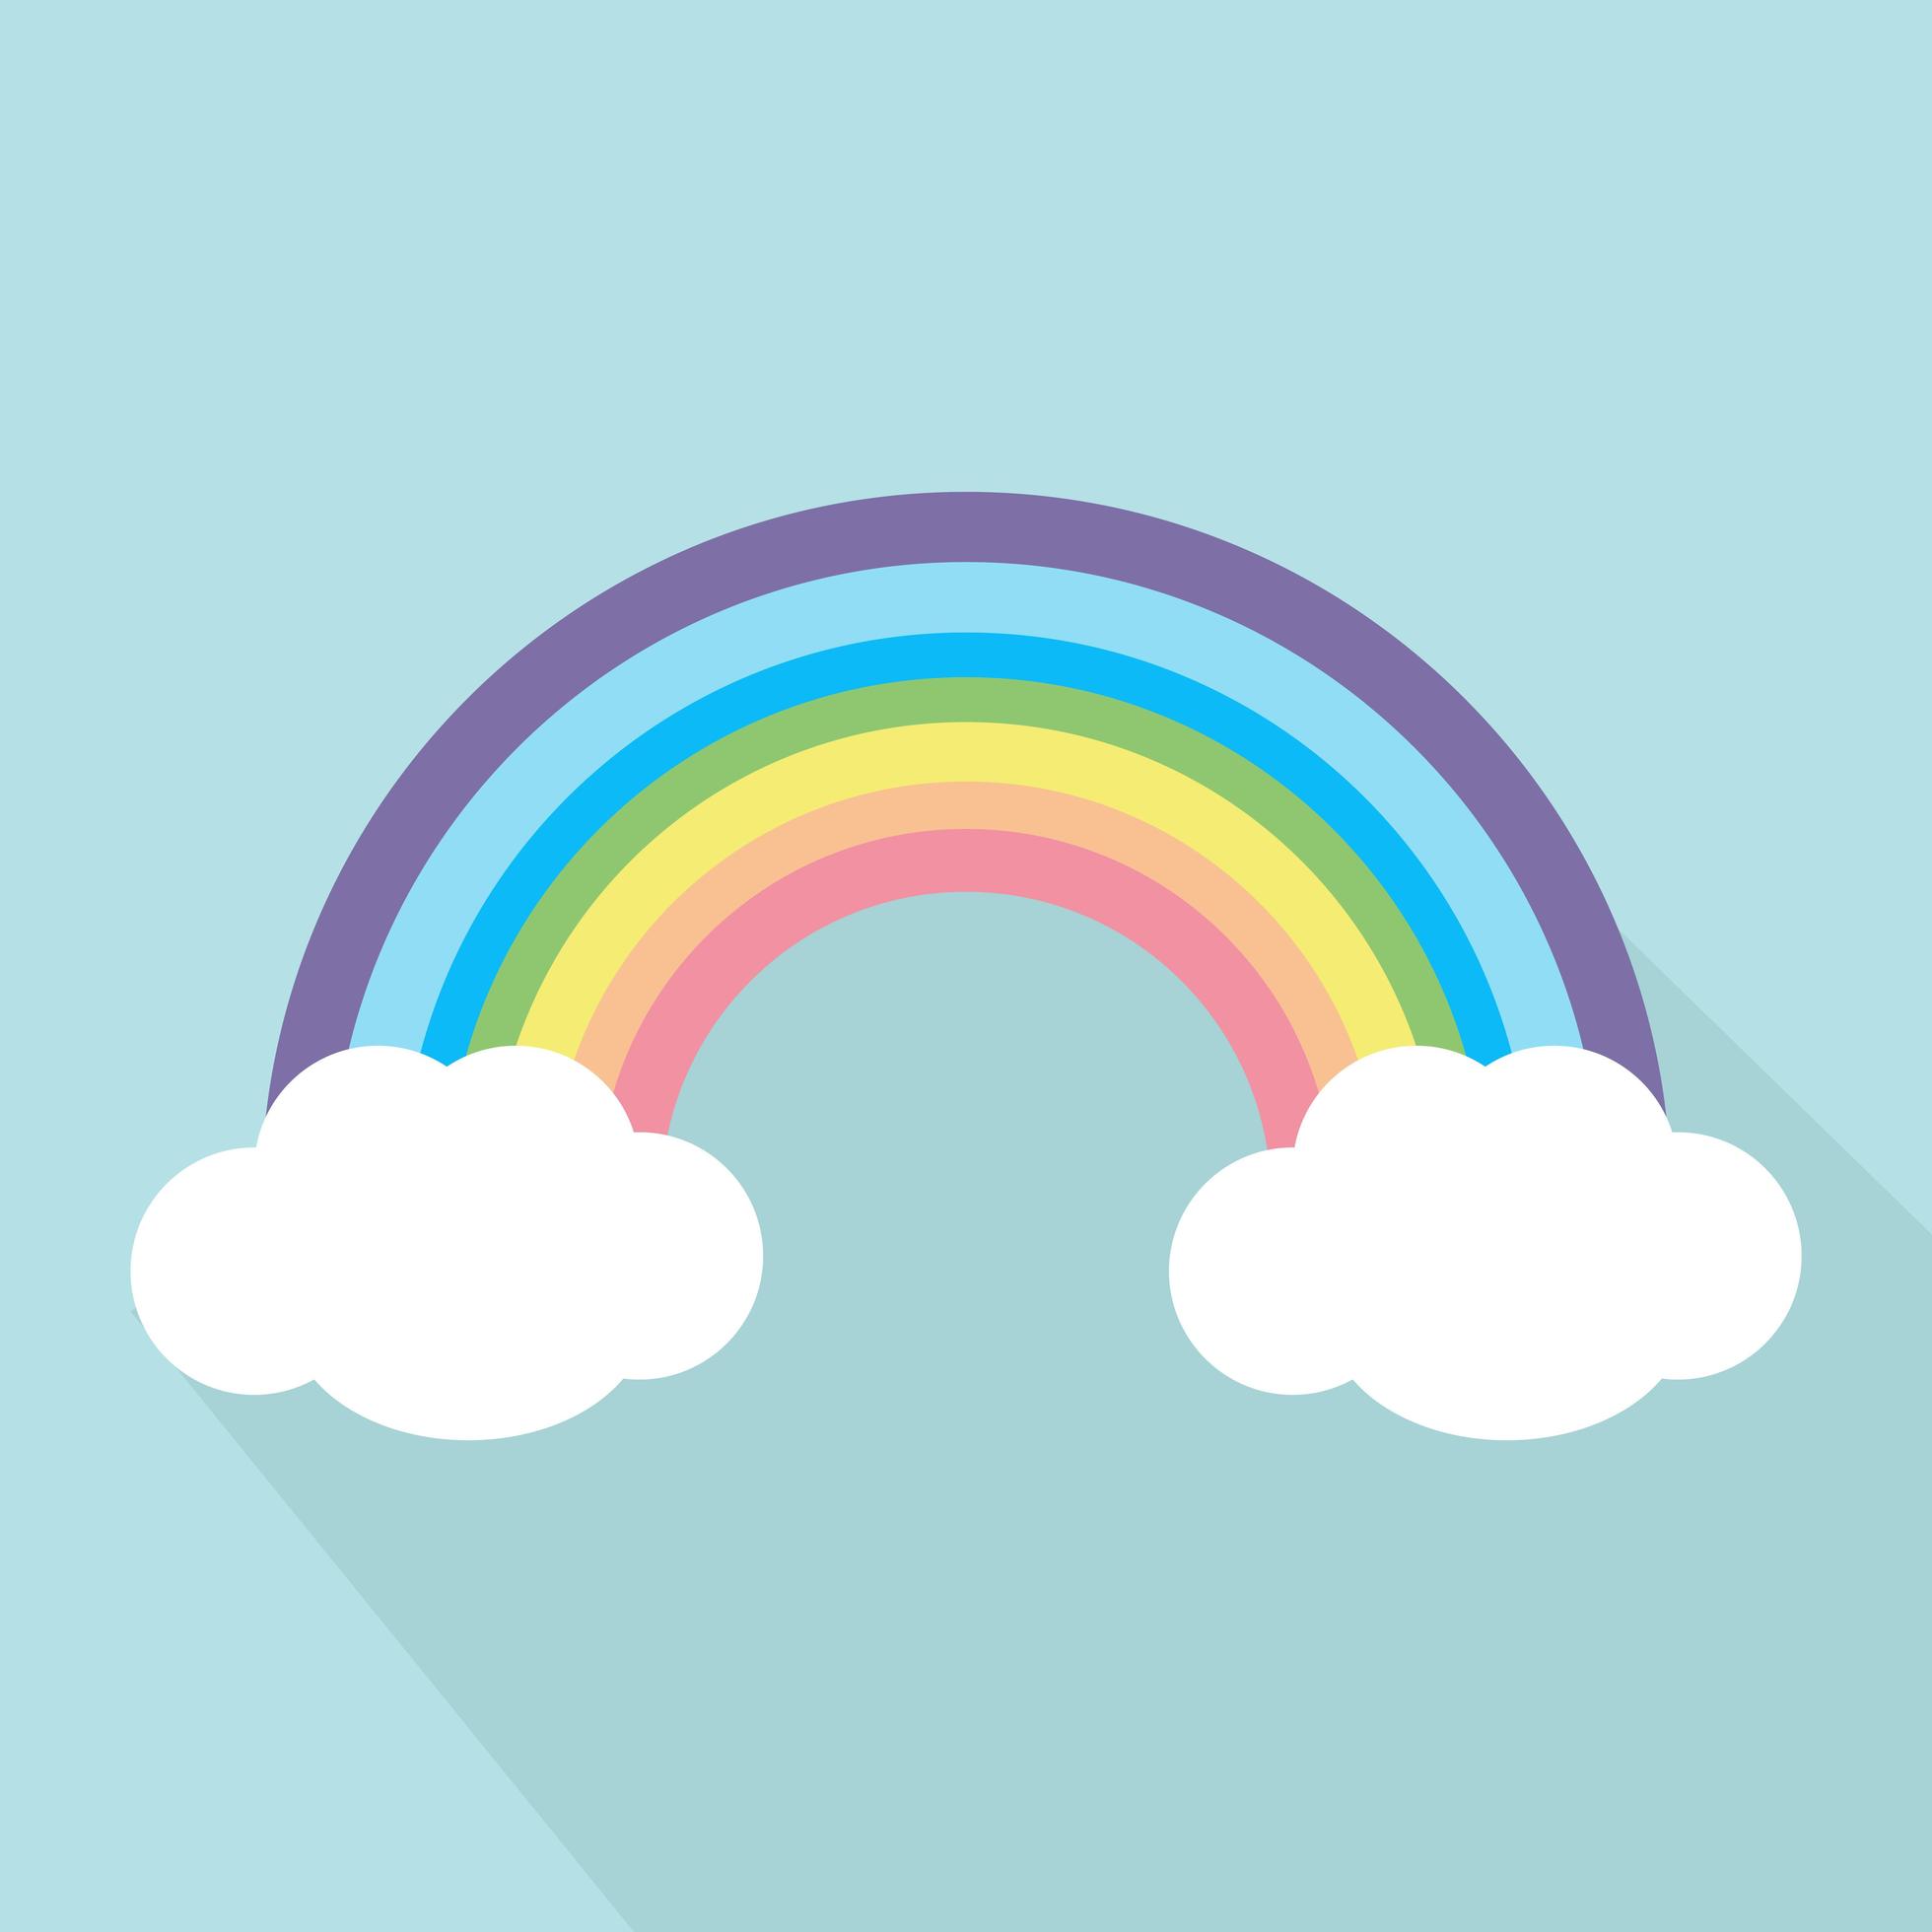 Pastel rainbow with long shadow Download Free Vectors, Clipart